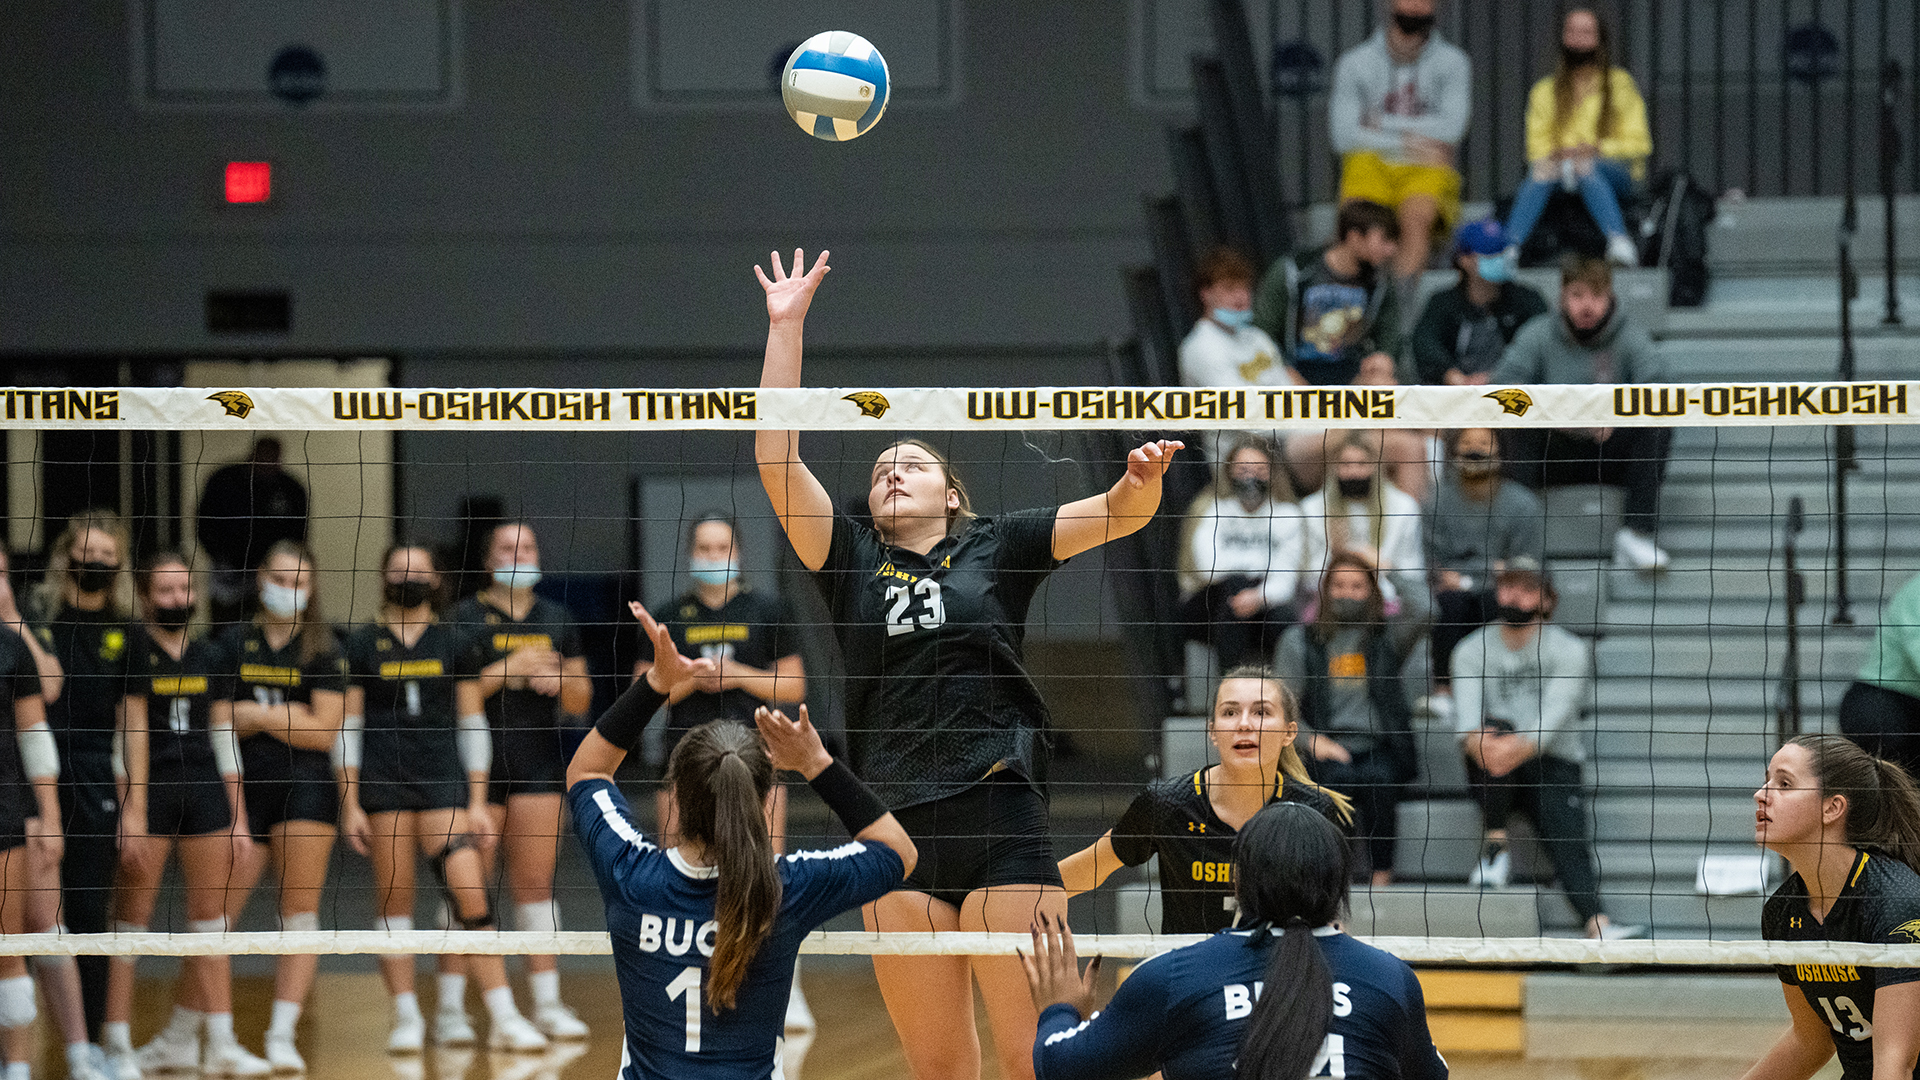 Madyson Pearson had three kills and four block assists against the Buccaneers.